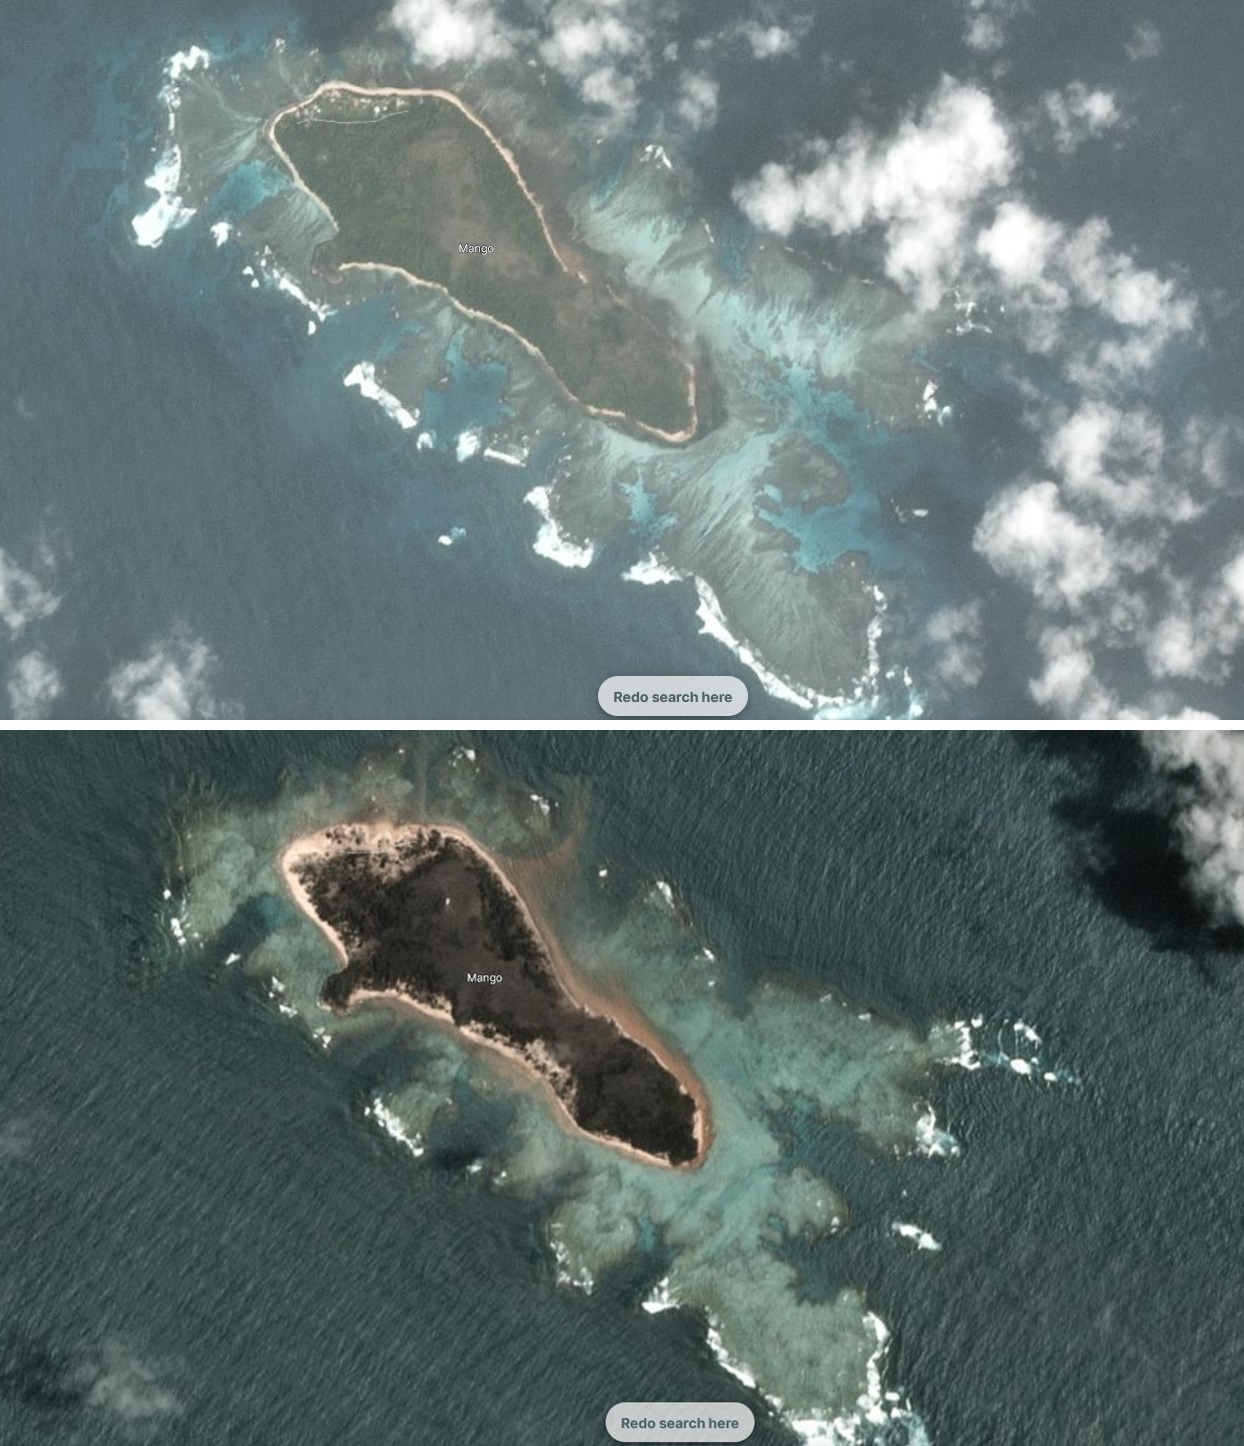 Before and after shot of Mango island